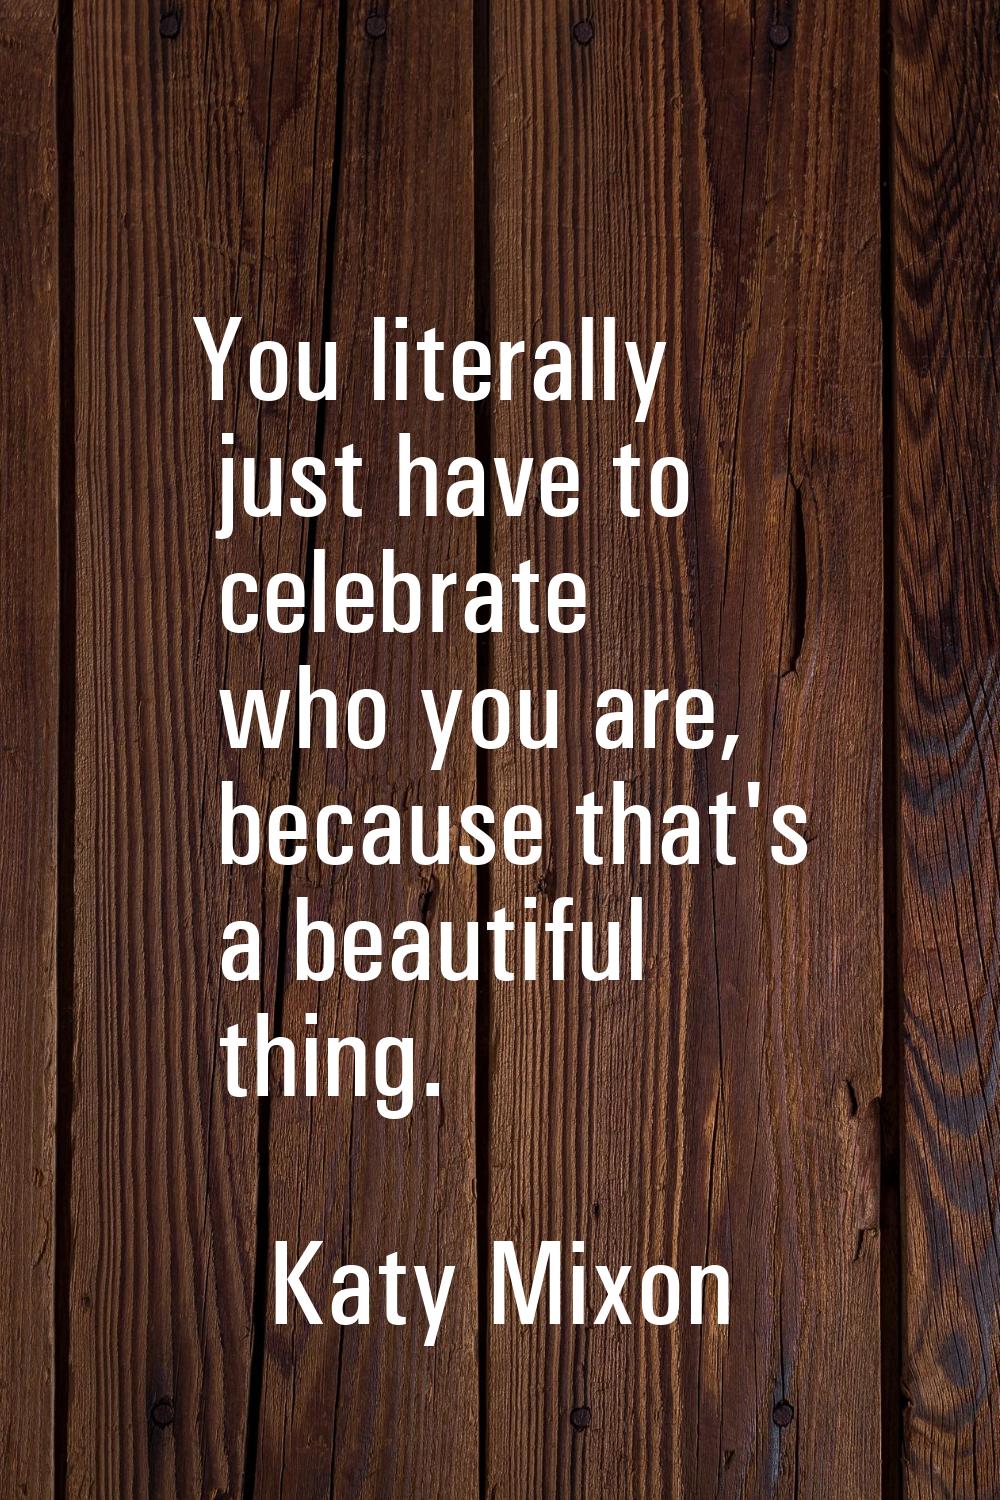 You literally just have to celebrate who you are, because that's a beautiful thing.